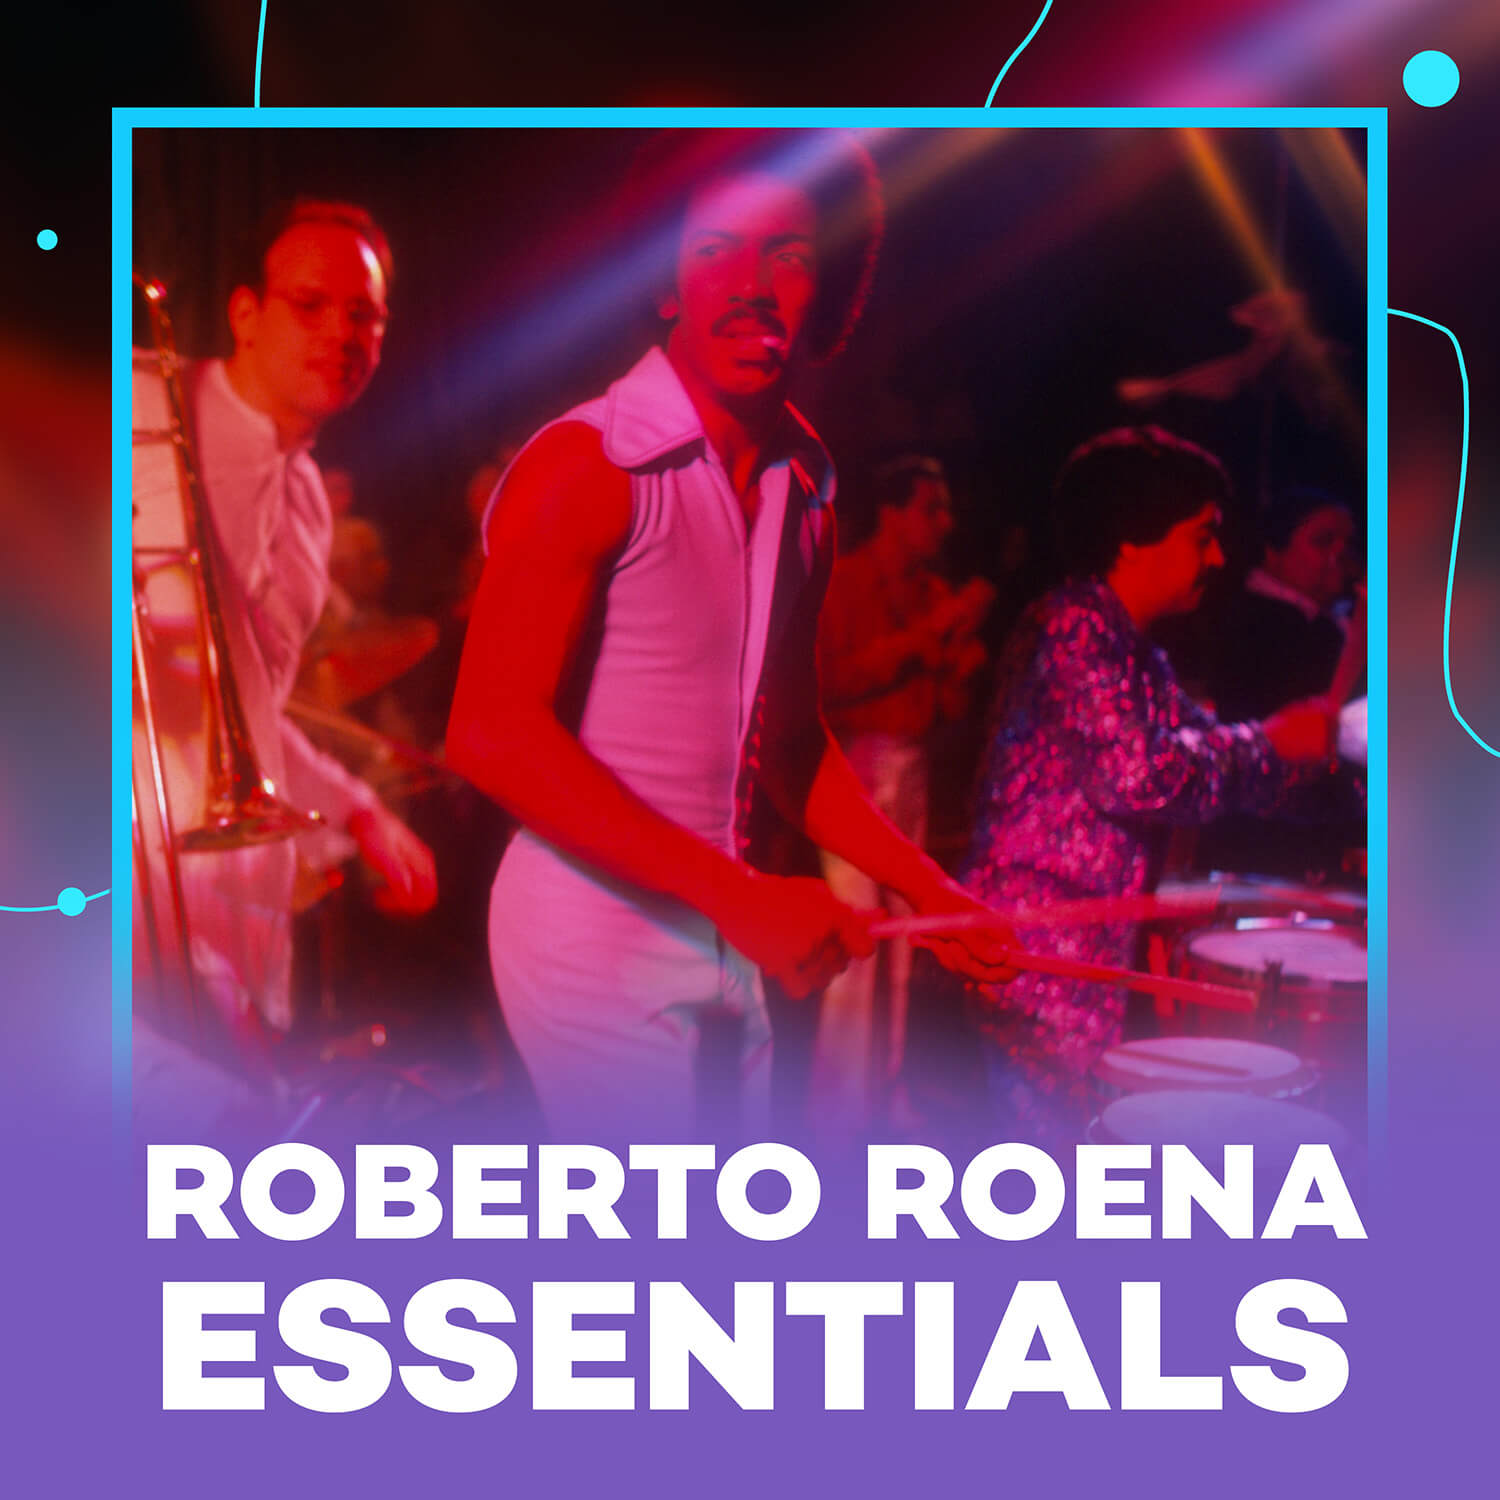 Featured image for “Roberto Roena”